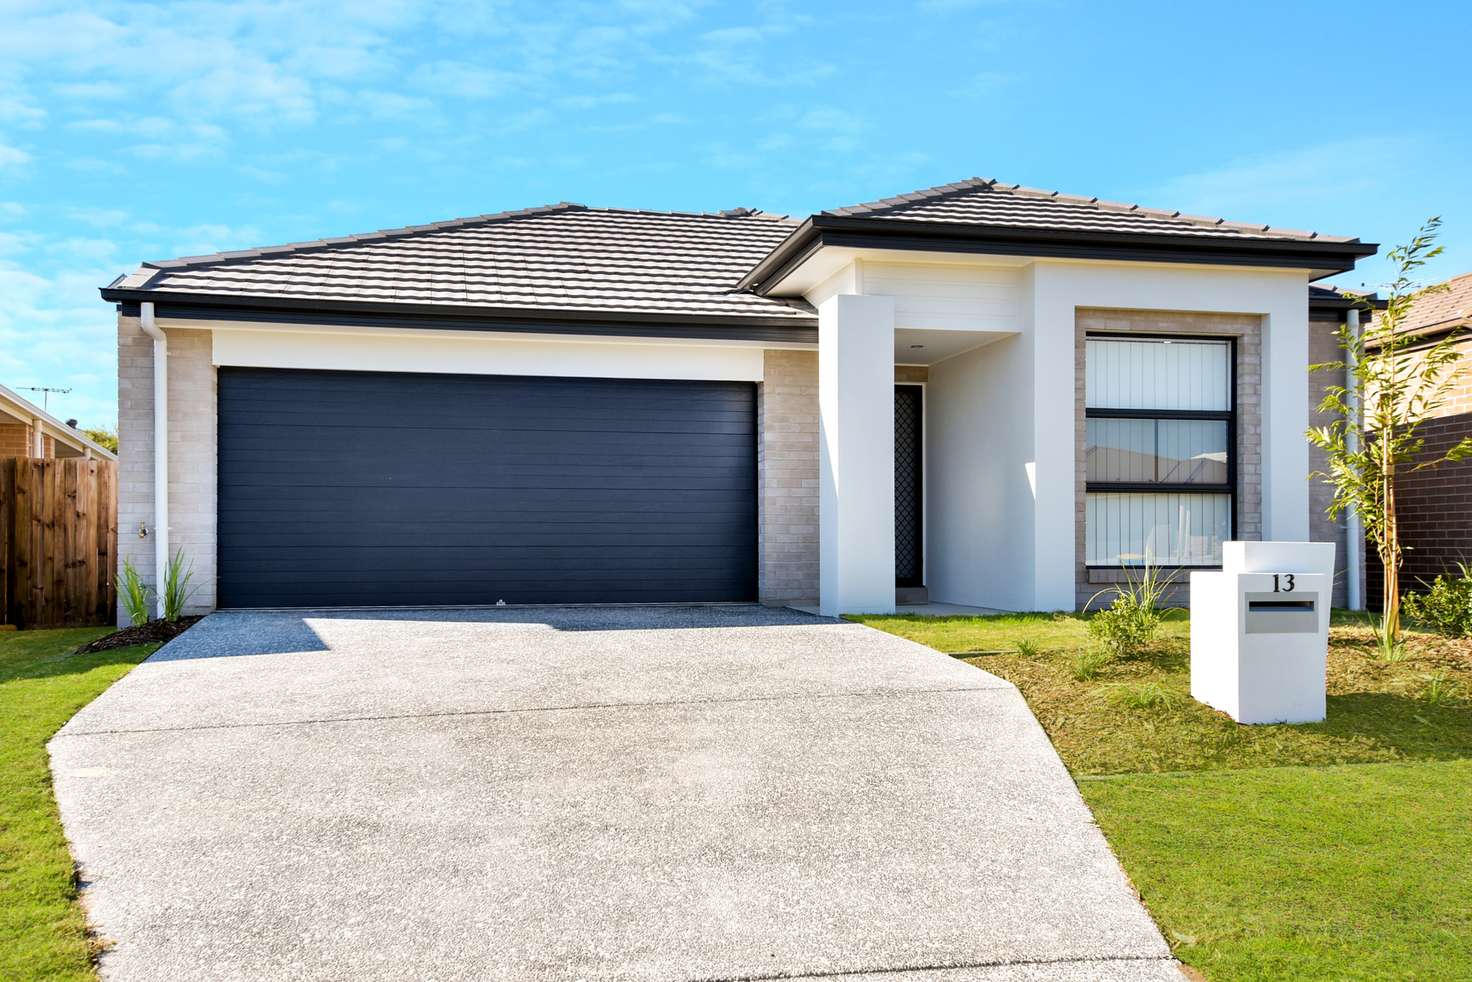 Main view of Homely house listing, 13 Rockford Street, Pimpama QLD 4209